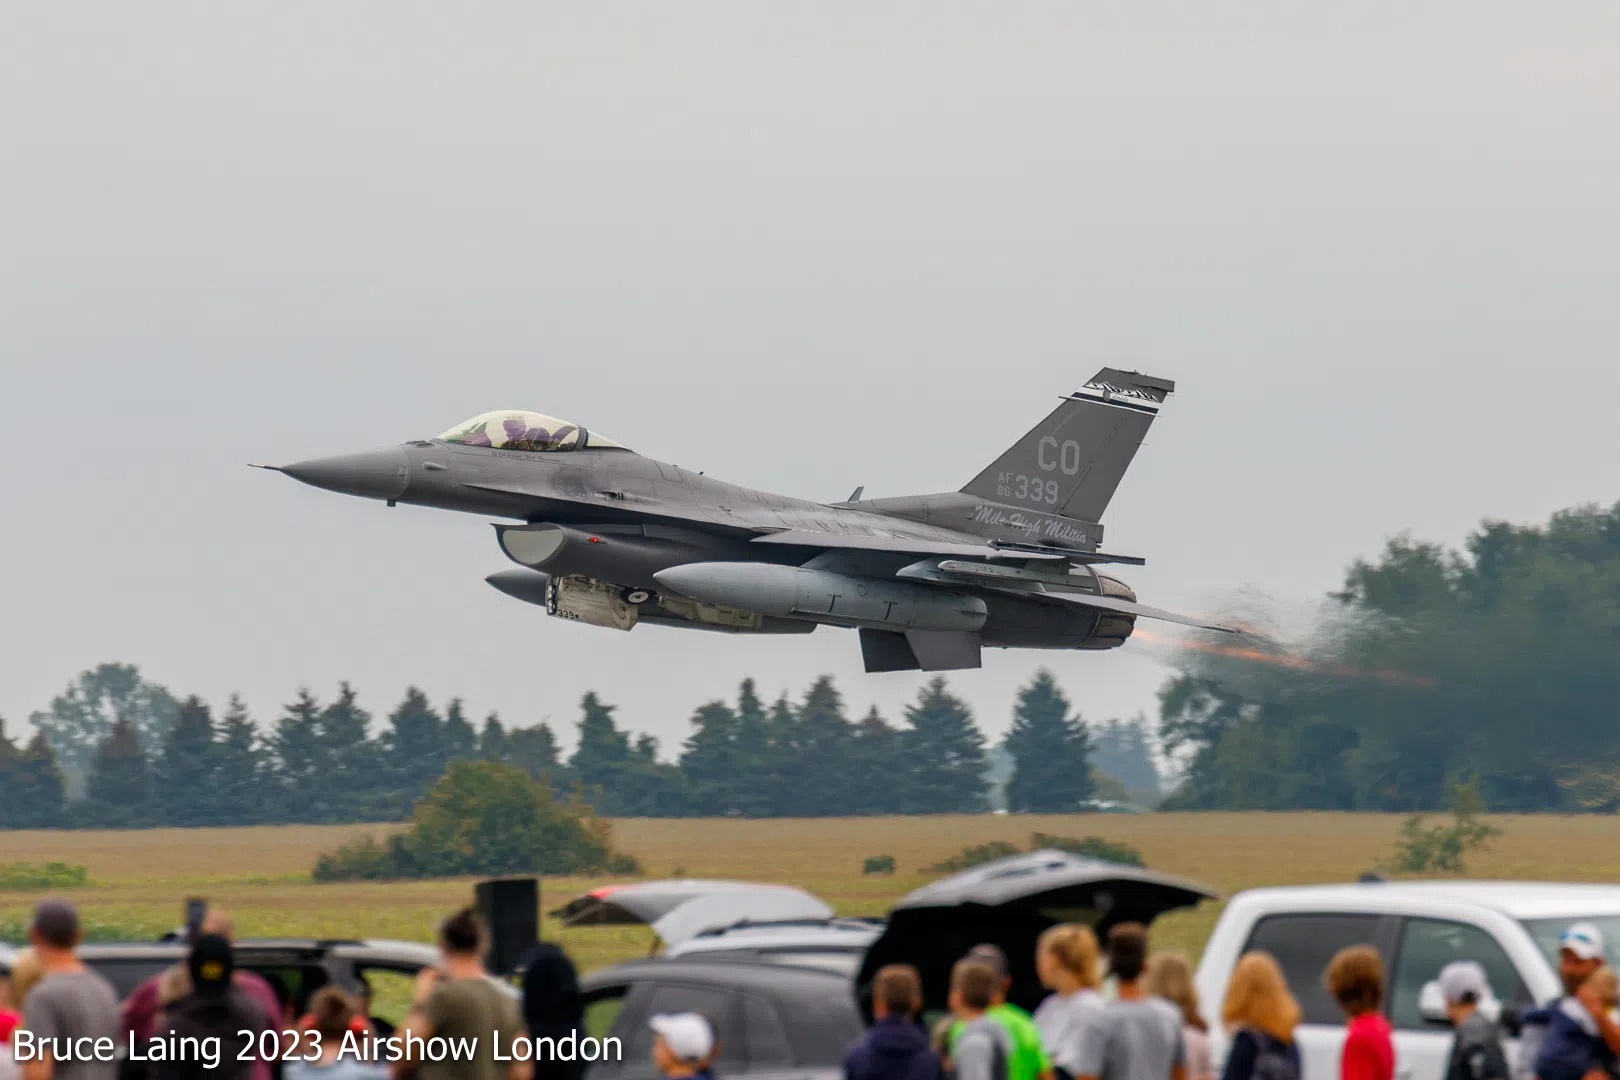 Airshow London named Best Air Show across North America